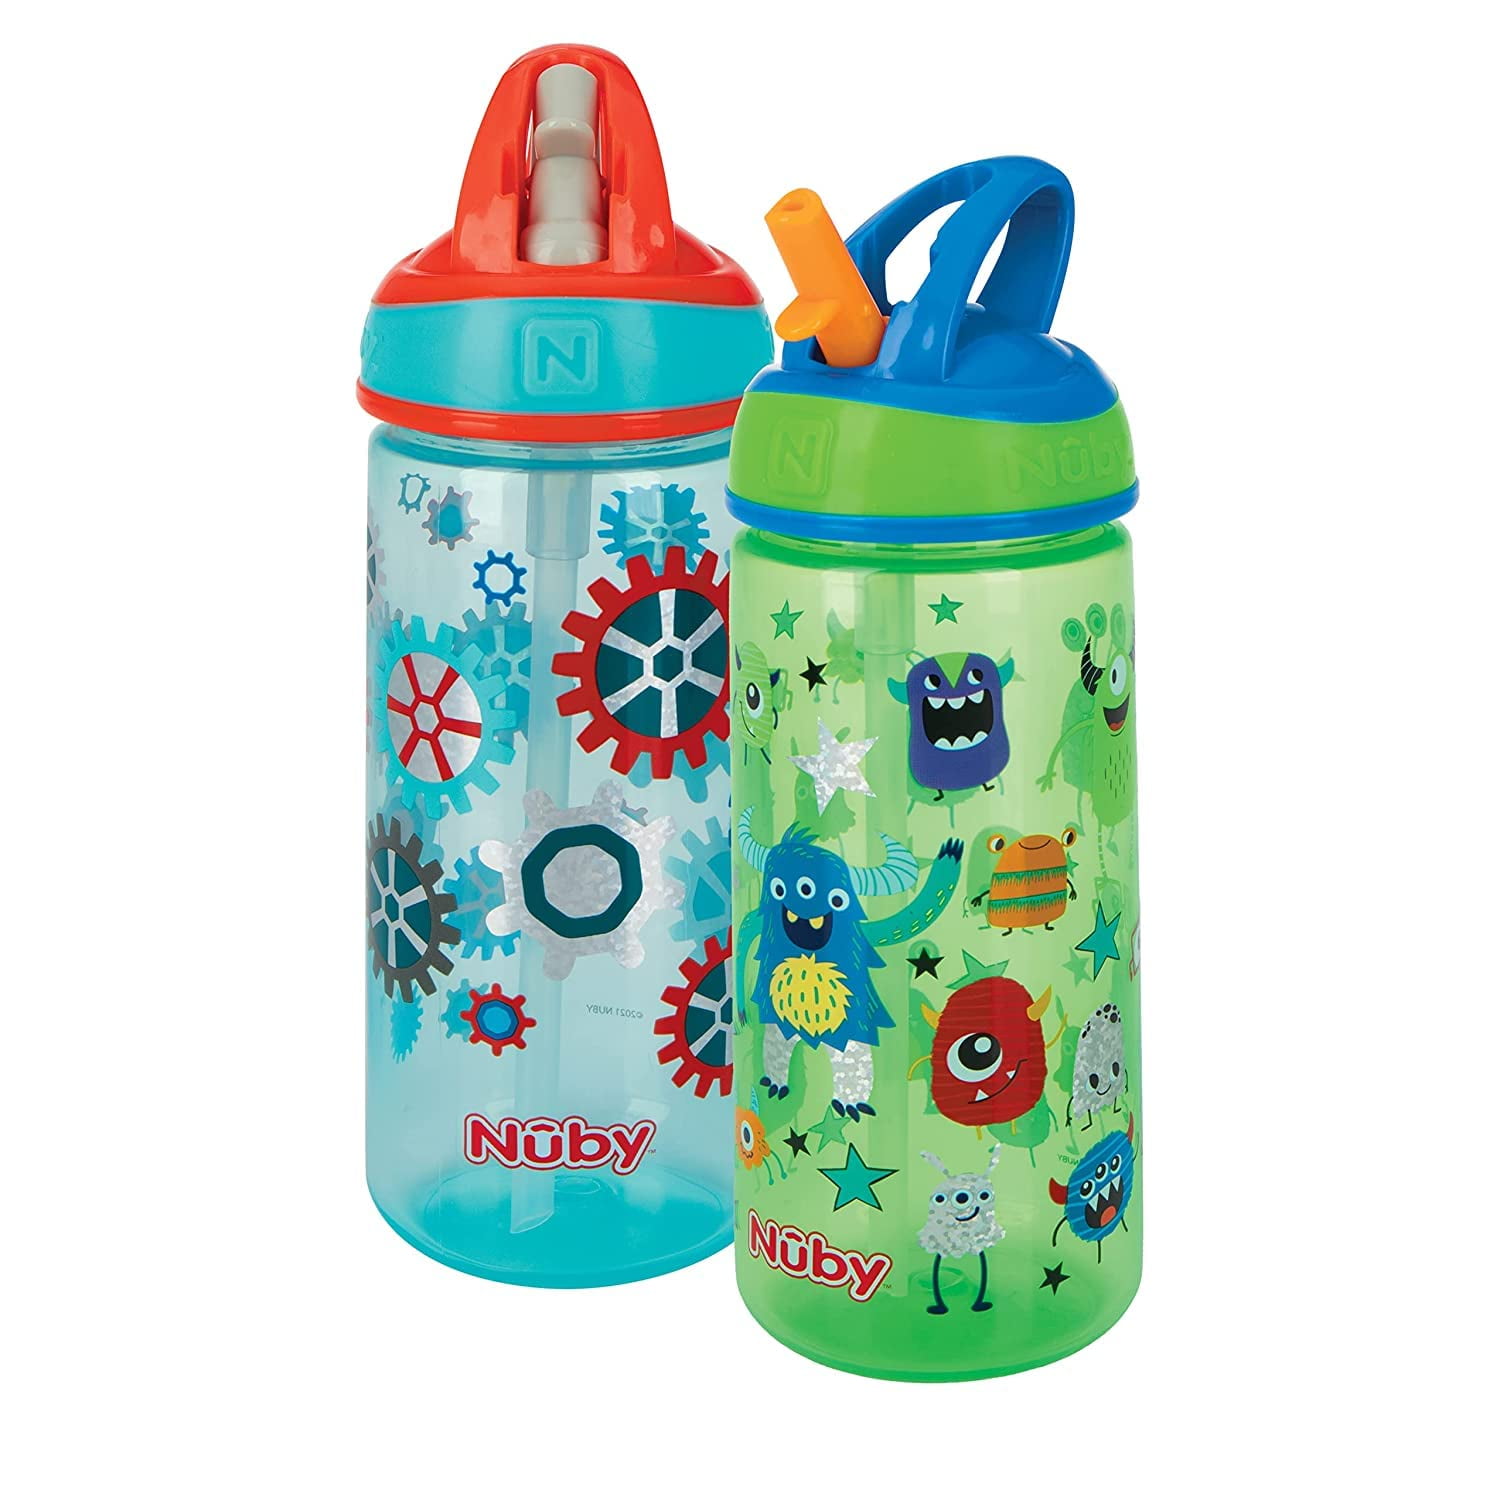 Nuby 2 Pack Iridescent Flip it Kids On The Go Printed Water Bottle with  Bite Proof Hard Straw - 18oz / 540 ml, 18 Months plus, 2 pk Robots/  Friendly